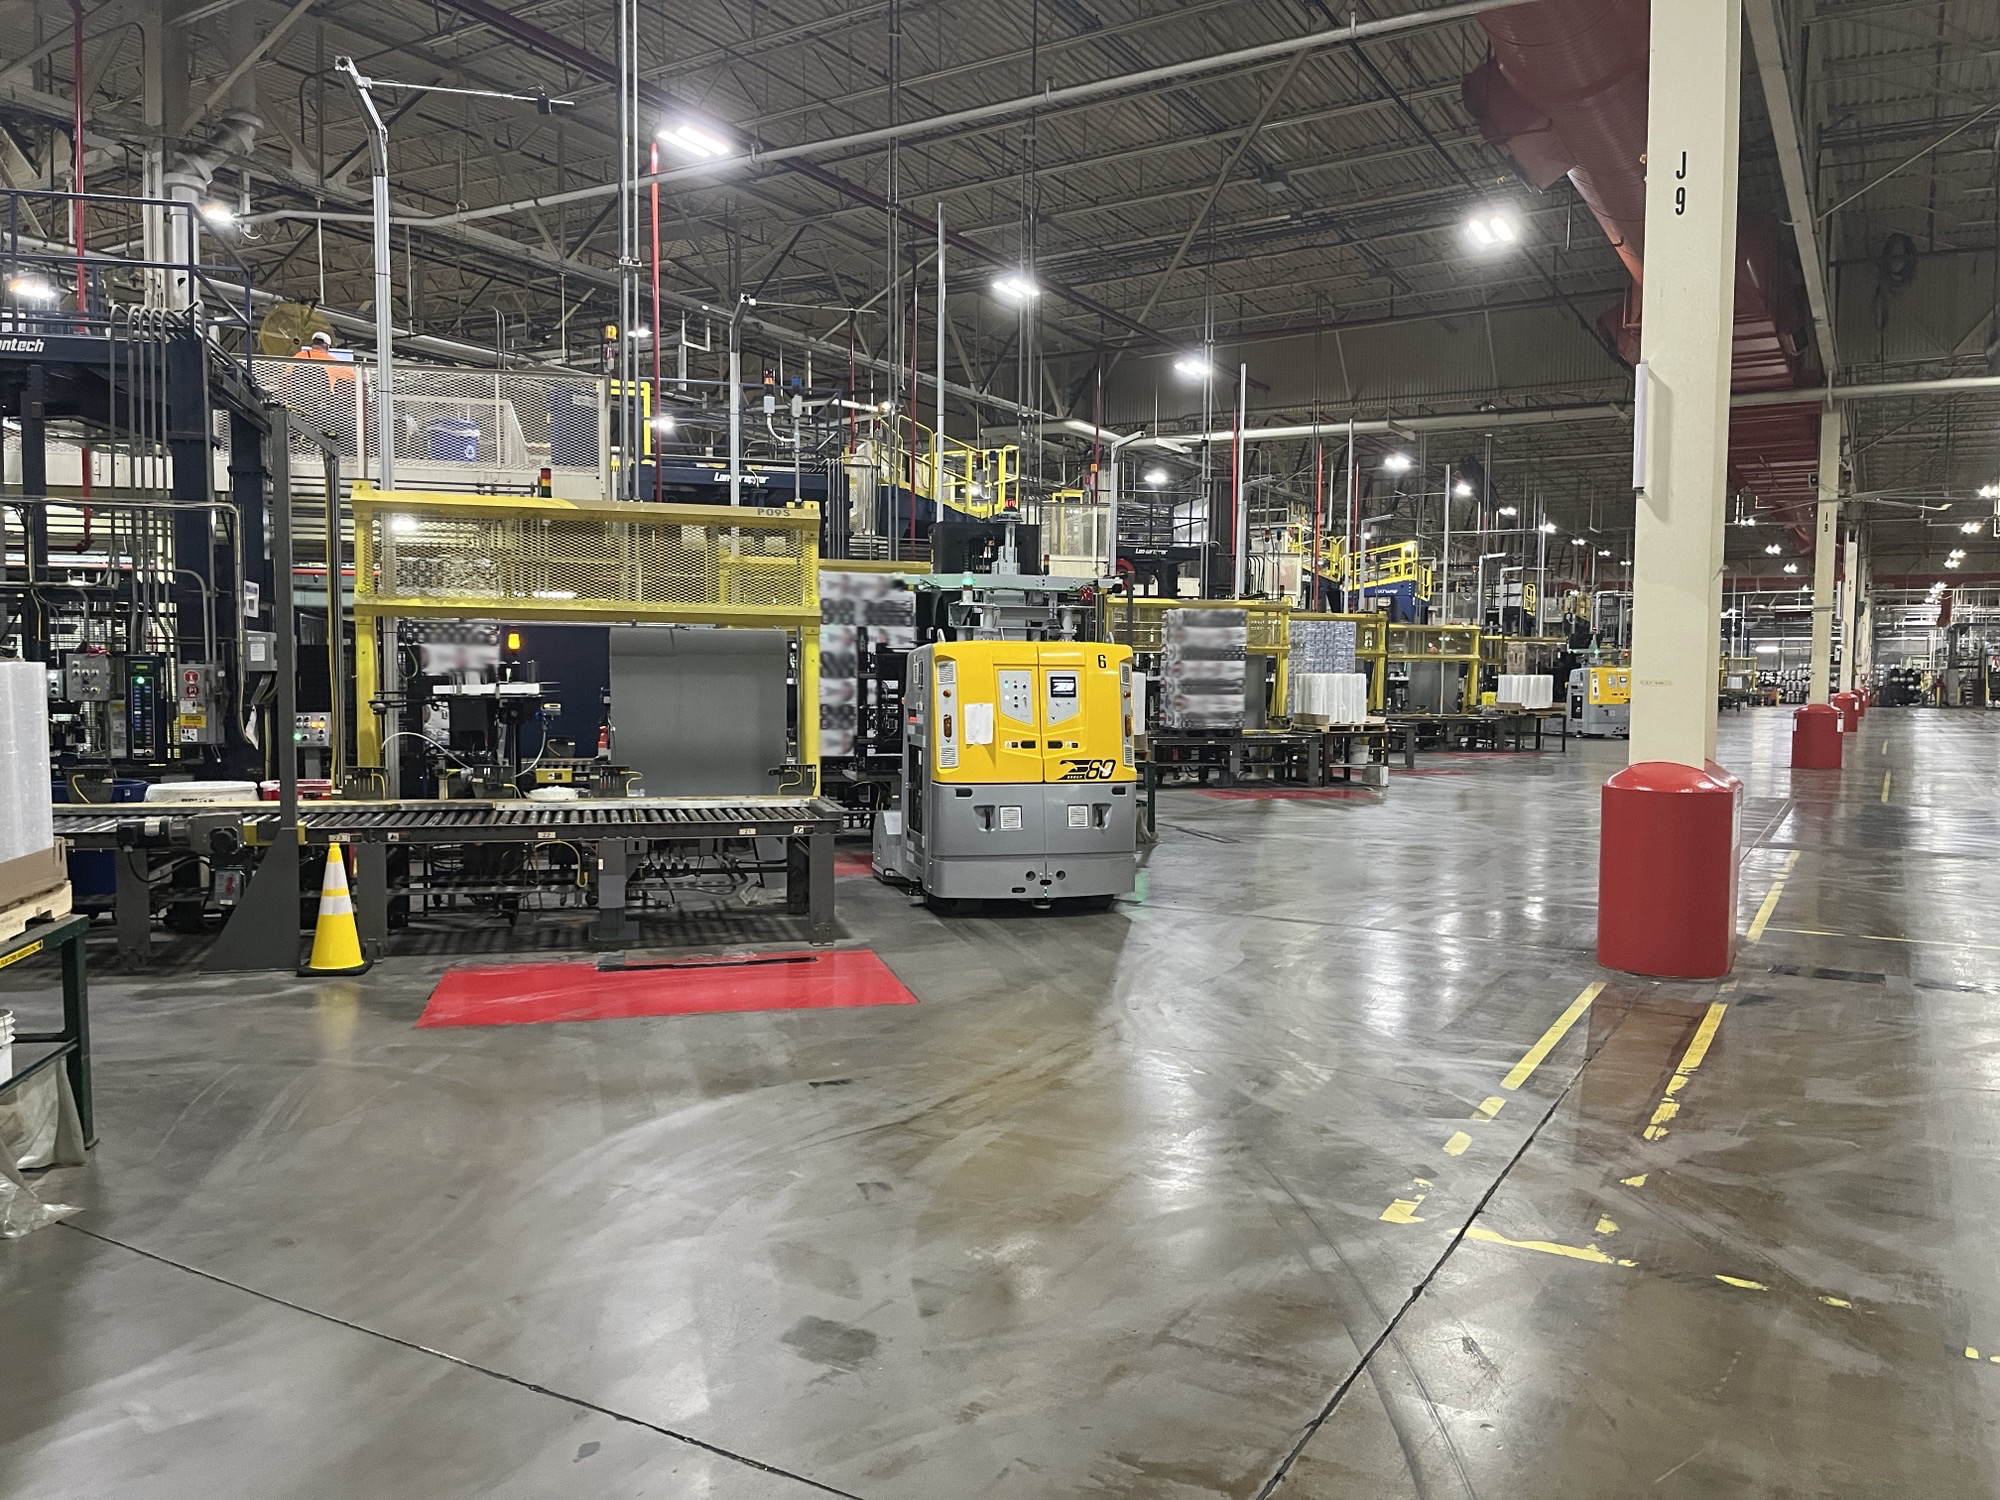 Laser guided vehicles move product in a warehouse